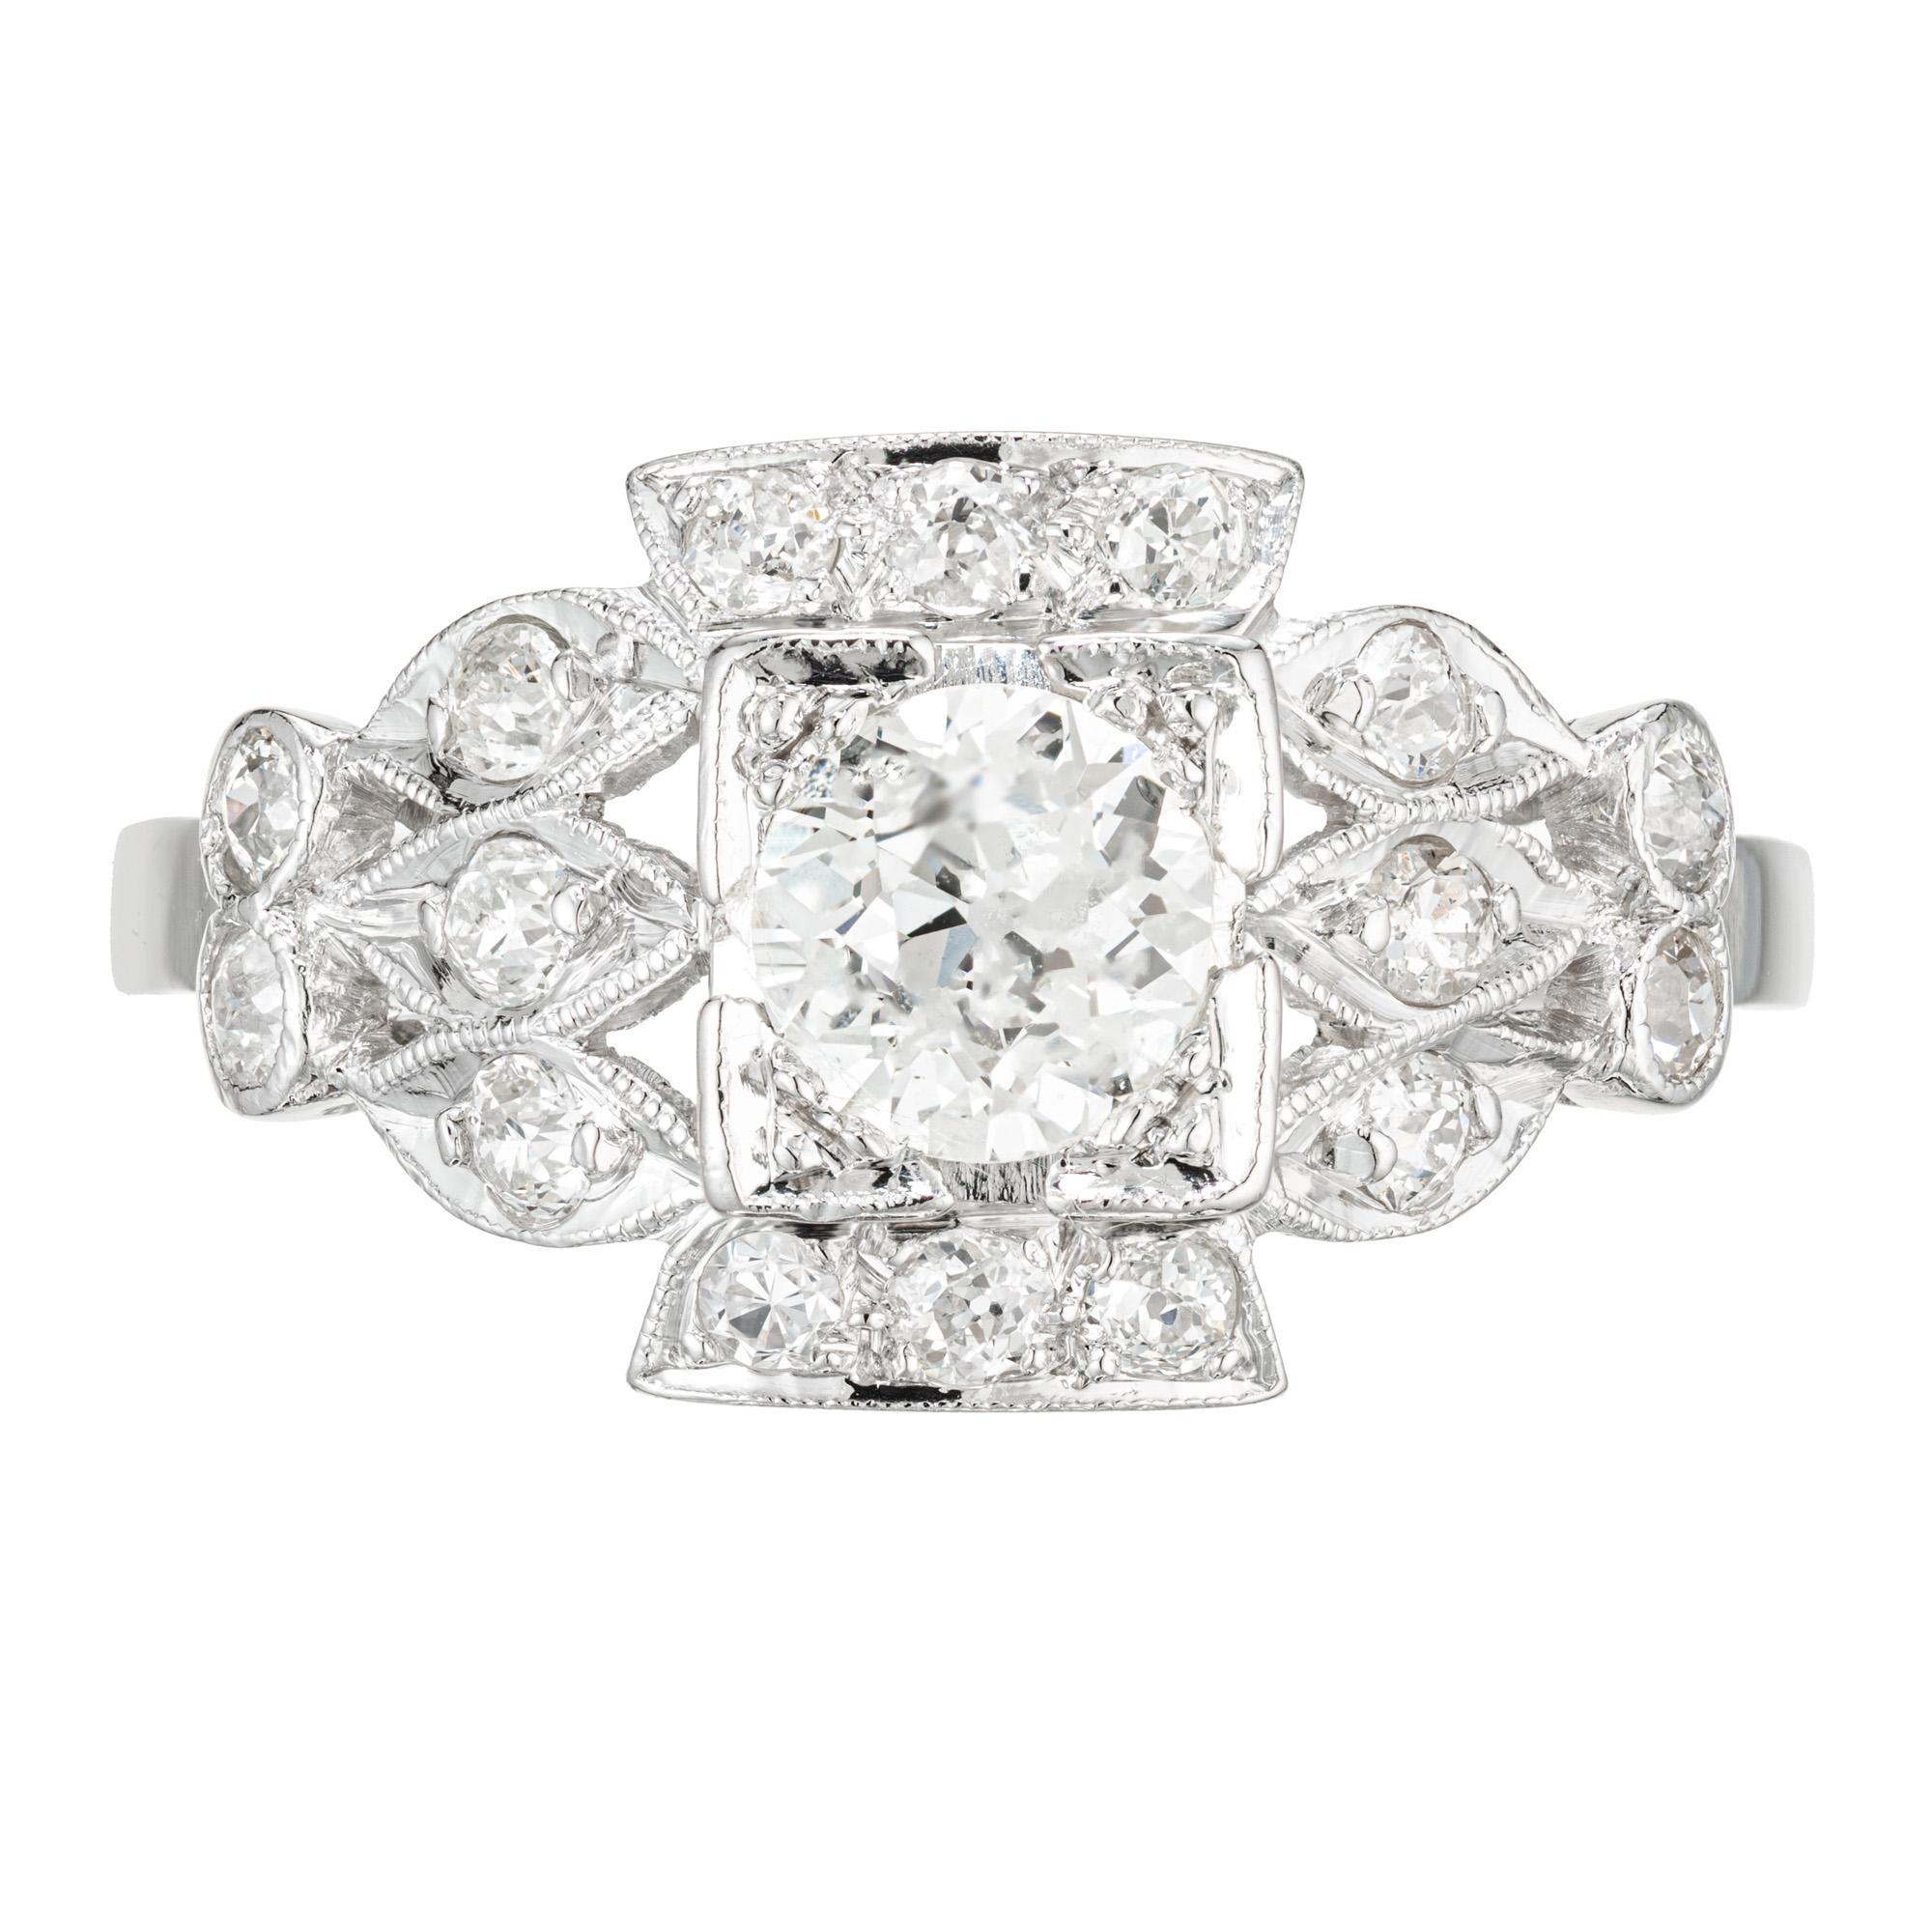 Platinum Art Deco 1920's diamond engagement ring. .57ct old European cut center diamond in a platinum setting with 16 old European cut diamonds. 

1 old European cut diamond, approx. total weight .57cts, H – I, VS1, 
16 old European cut diamonds,